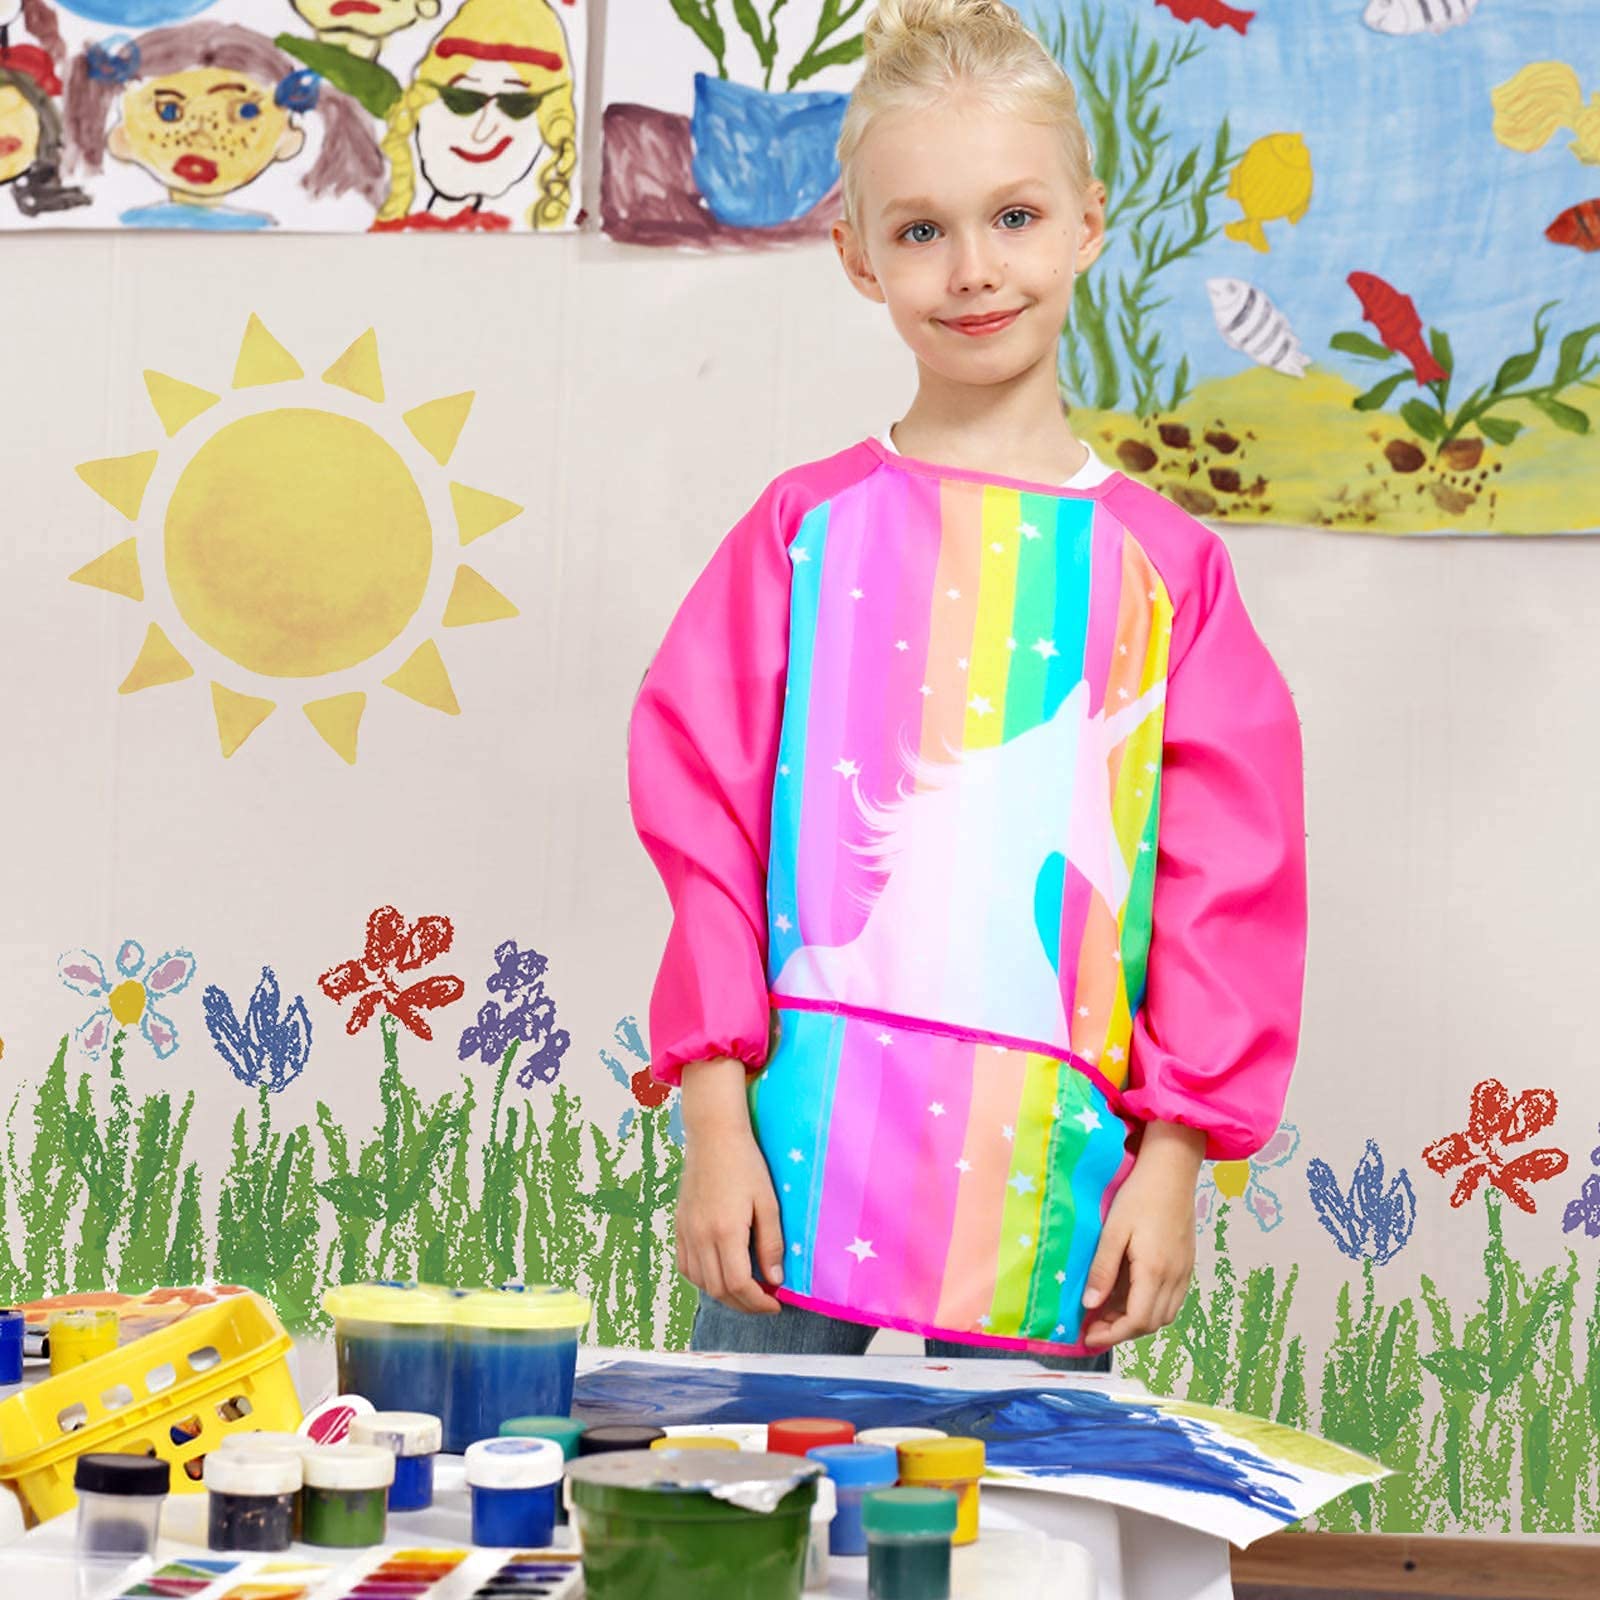 Fiodrimy Kids Art Smock Toddler Smock Waterproof Artist Painting Aprons Long Sleeve with 3 Pockets for Age 2-7 Years